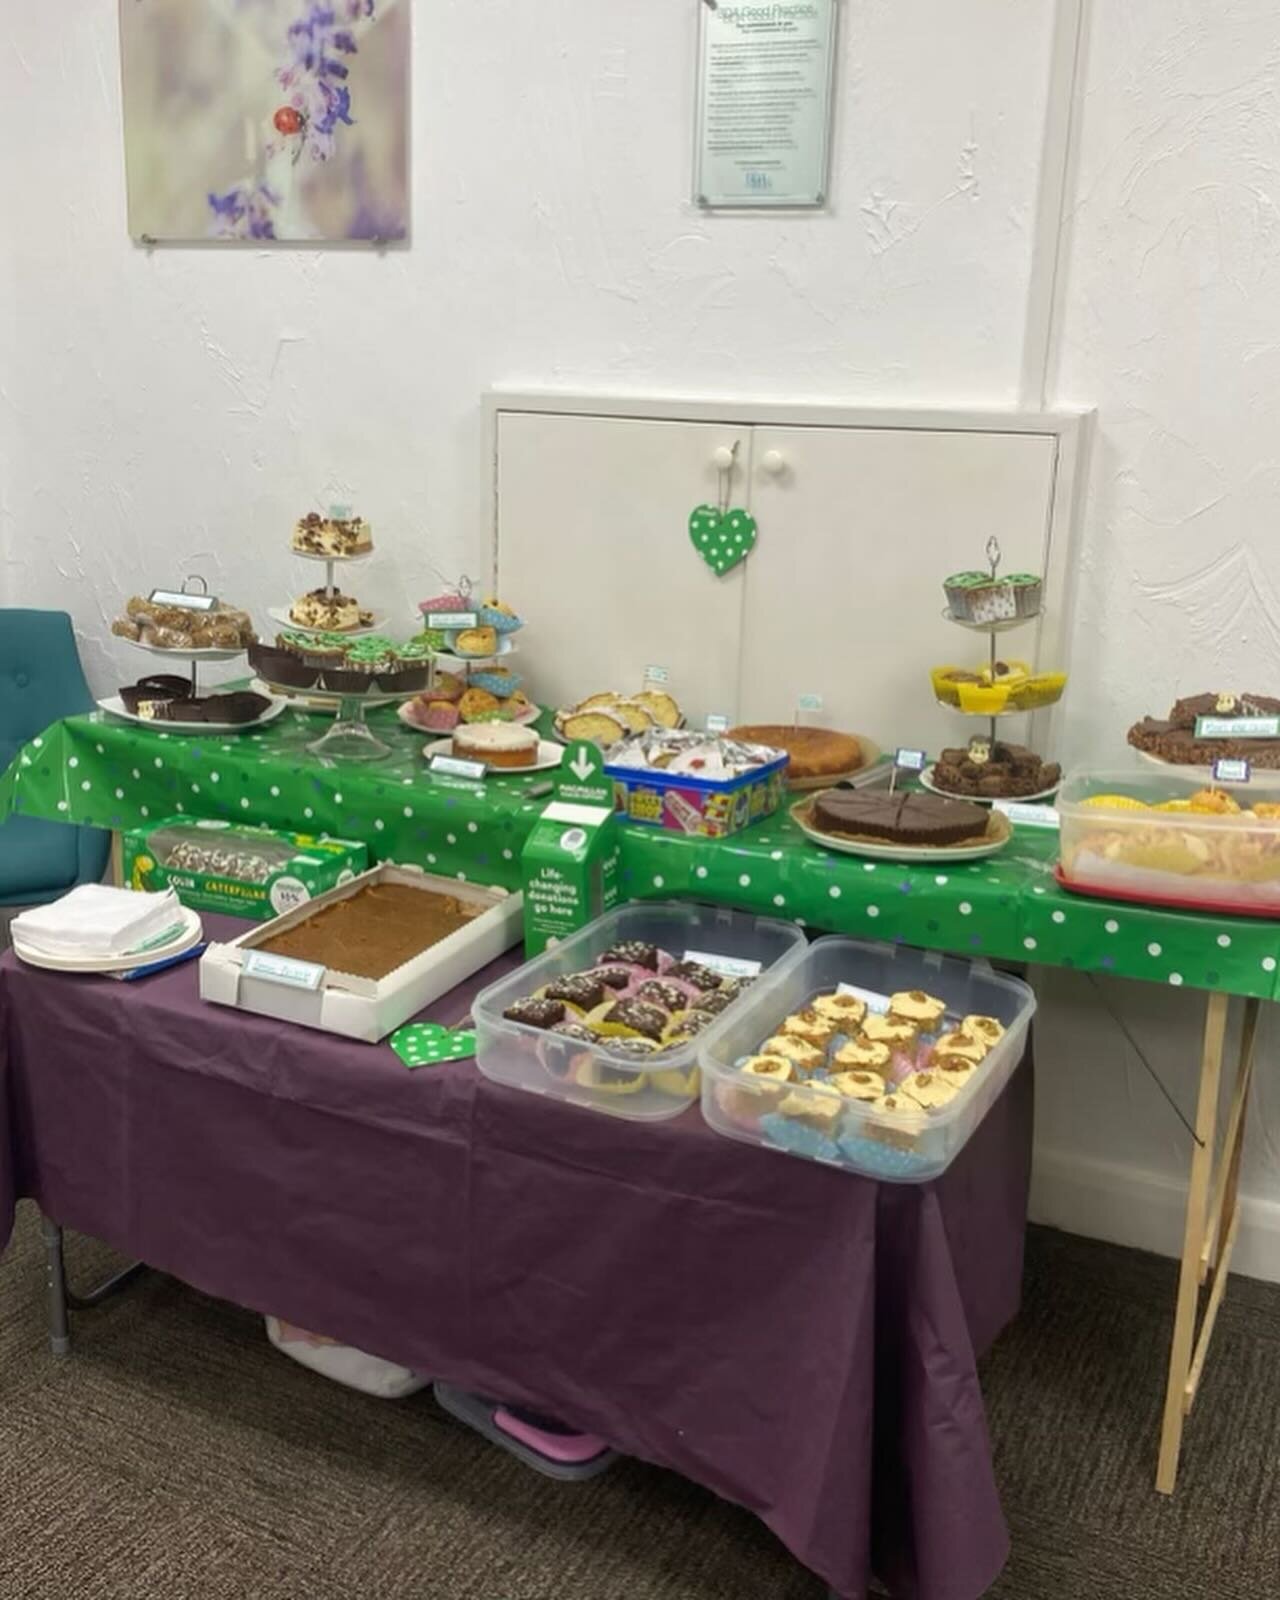 We have a great selection of cakes 🎂 🍰 🧁 all ready for you😁 
Be quick they might not last long, we might be dentists but we still eat cake❗️🤣

#macmillancancersupport #cakes #cakesale #charityevent #fundraising Denplan #denplan